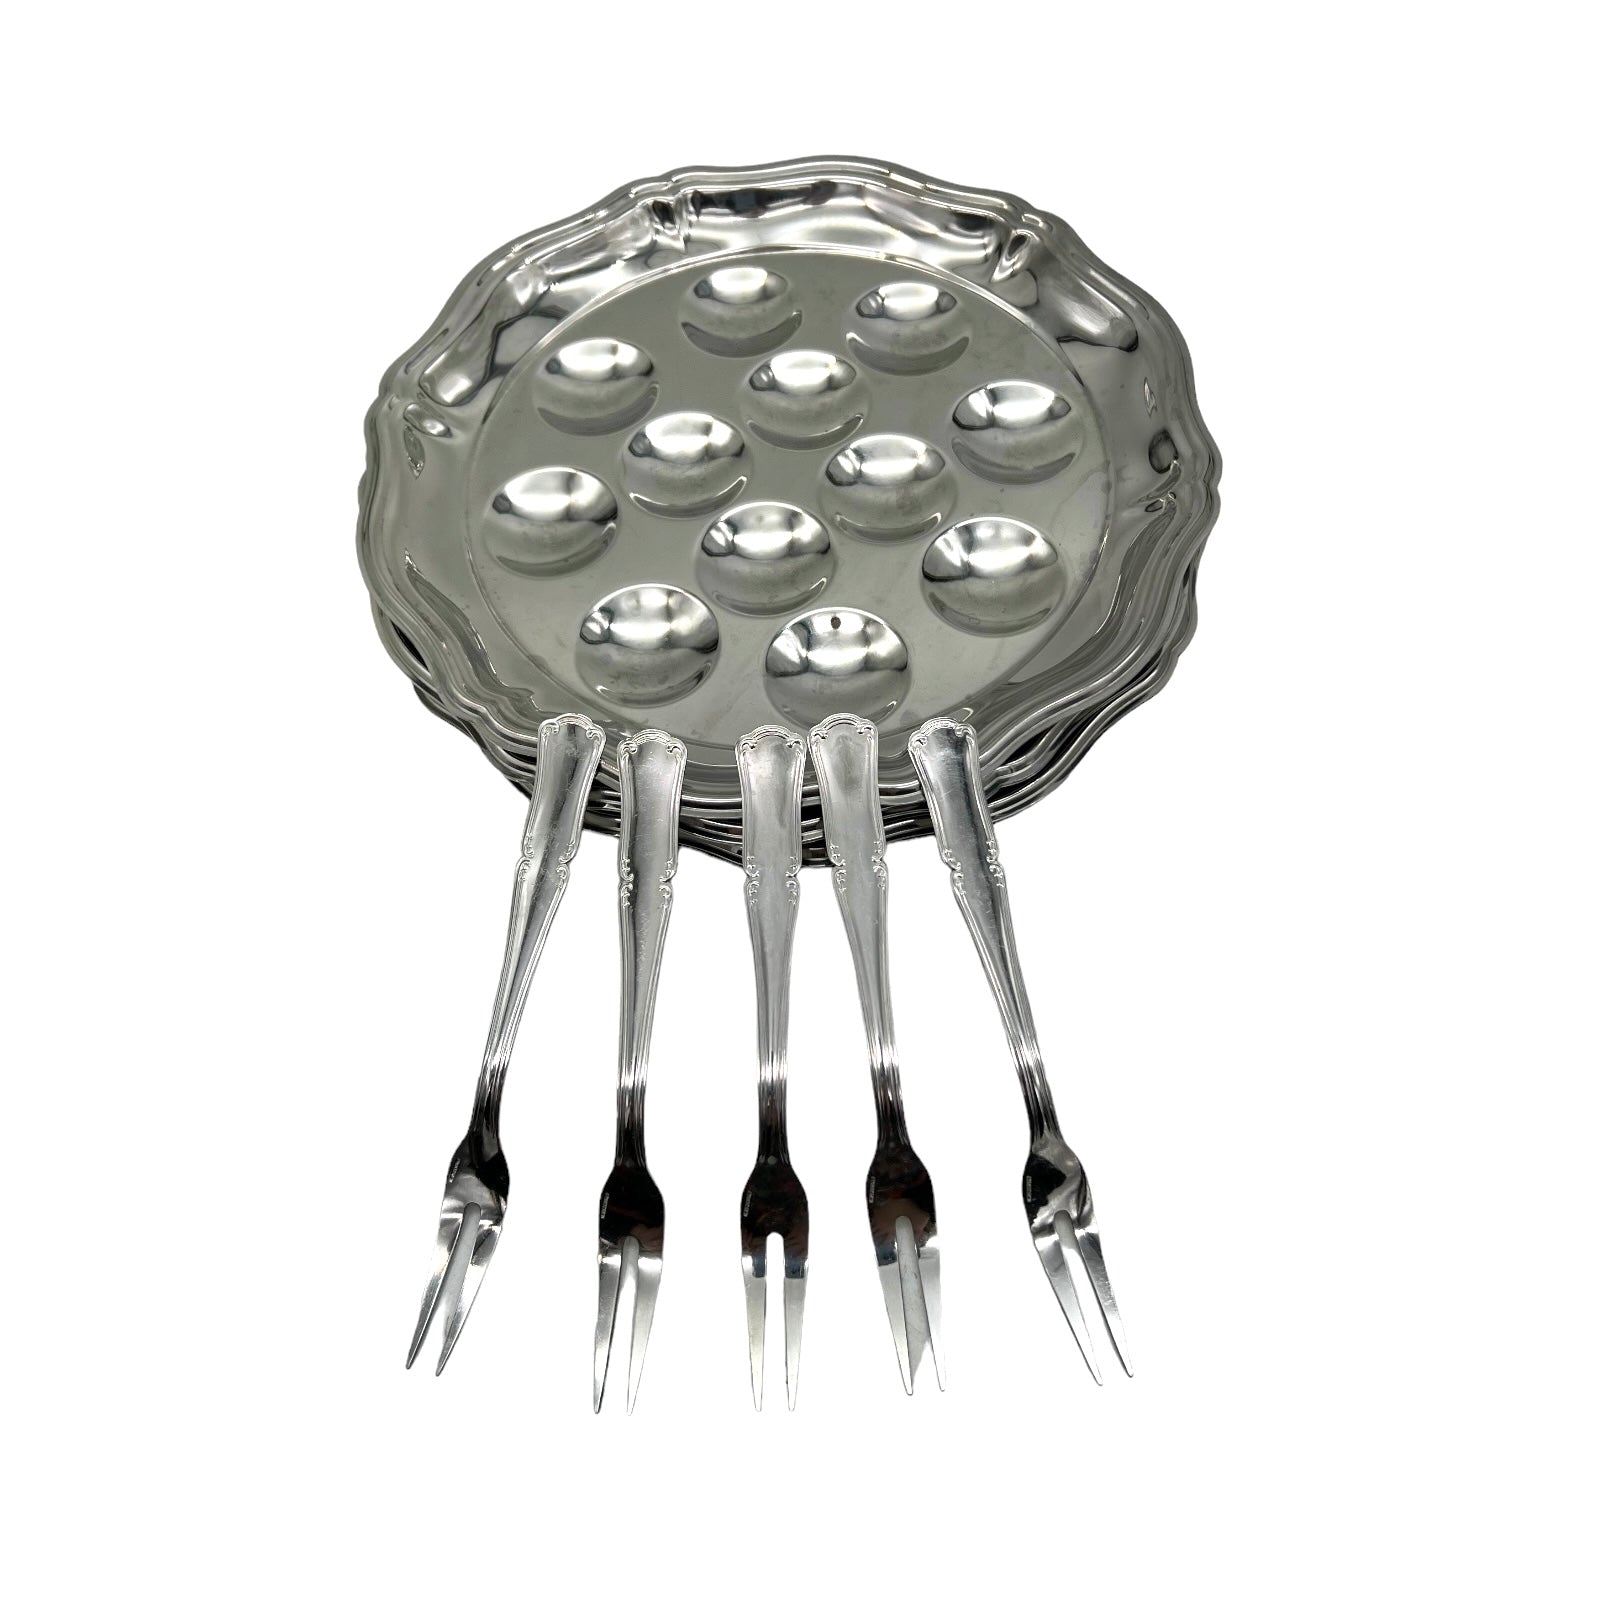 French stainless steel escargots plates with forks for sale